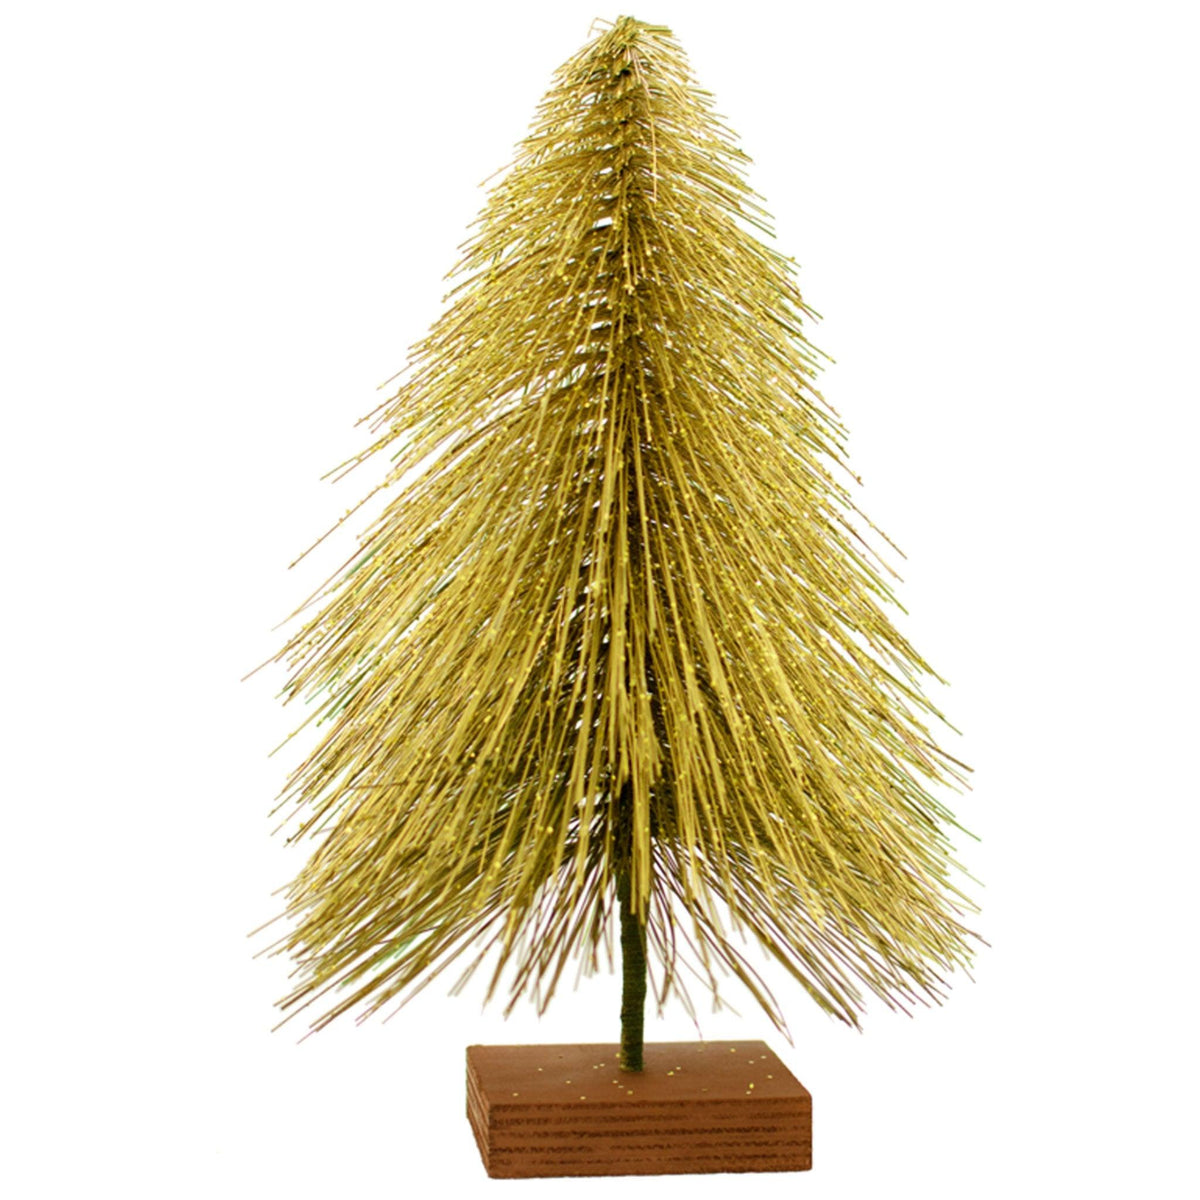 Mini Gold Bottlebrush Christmas Trees are sold at leedisplay.com.  Now come in sets of 3